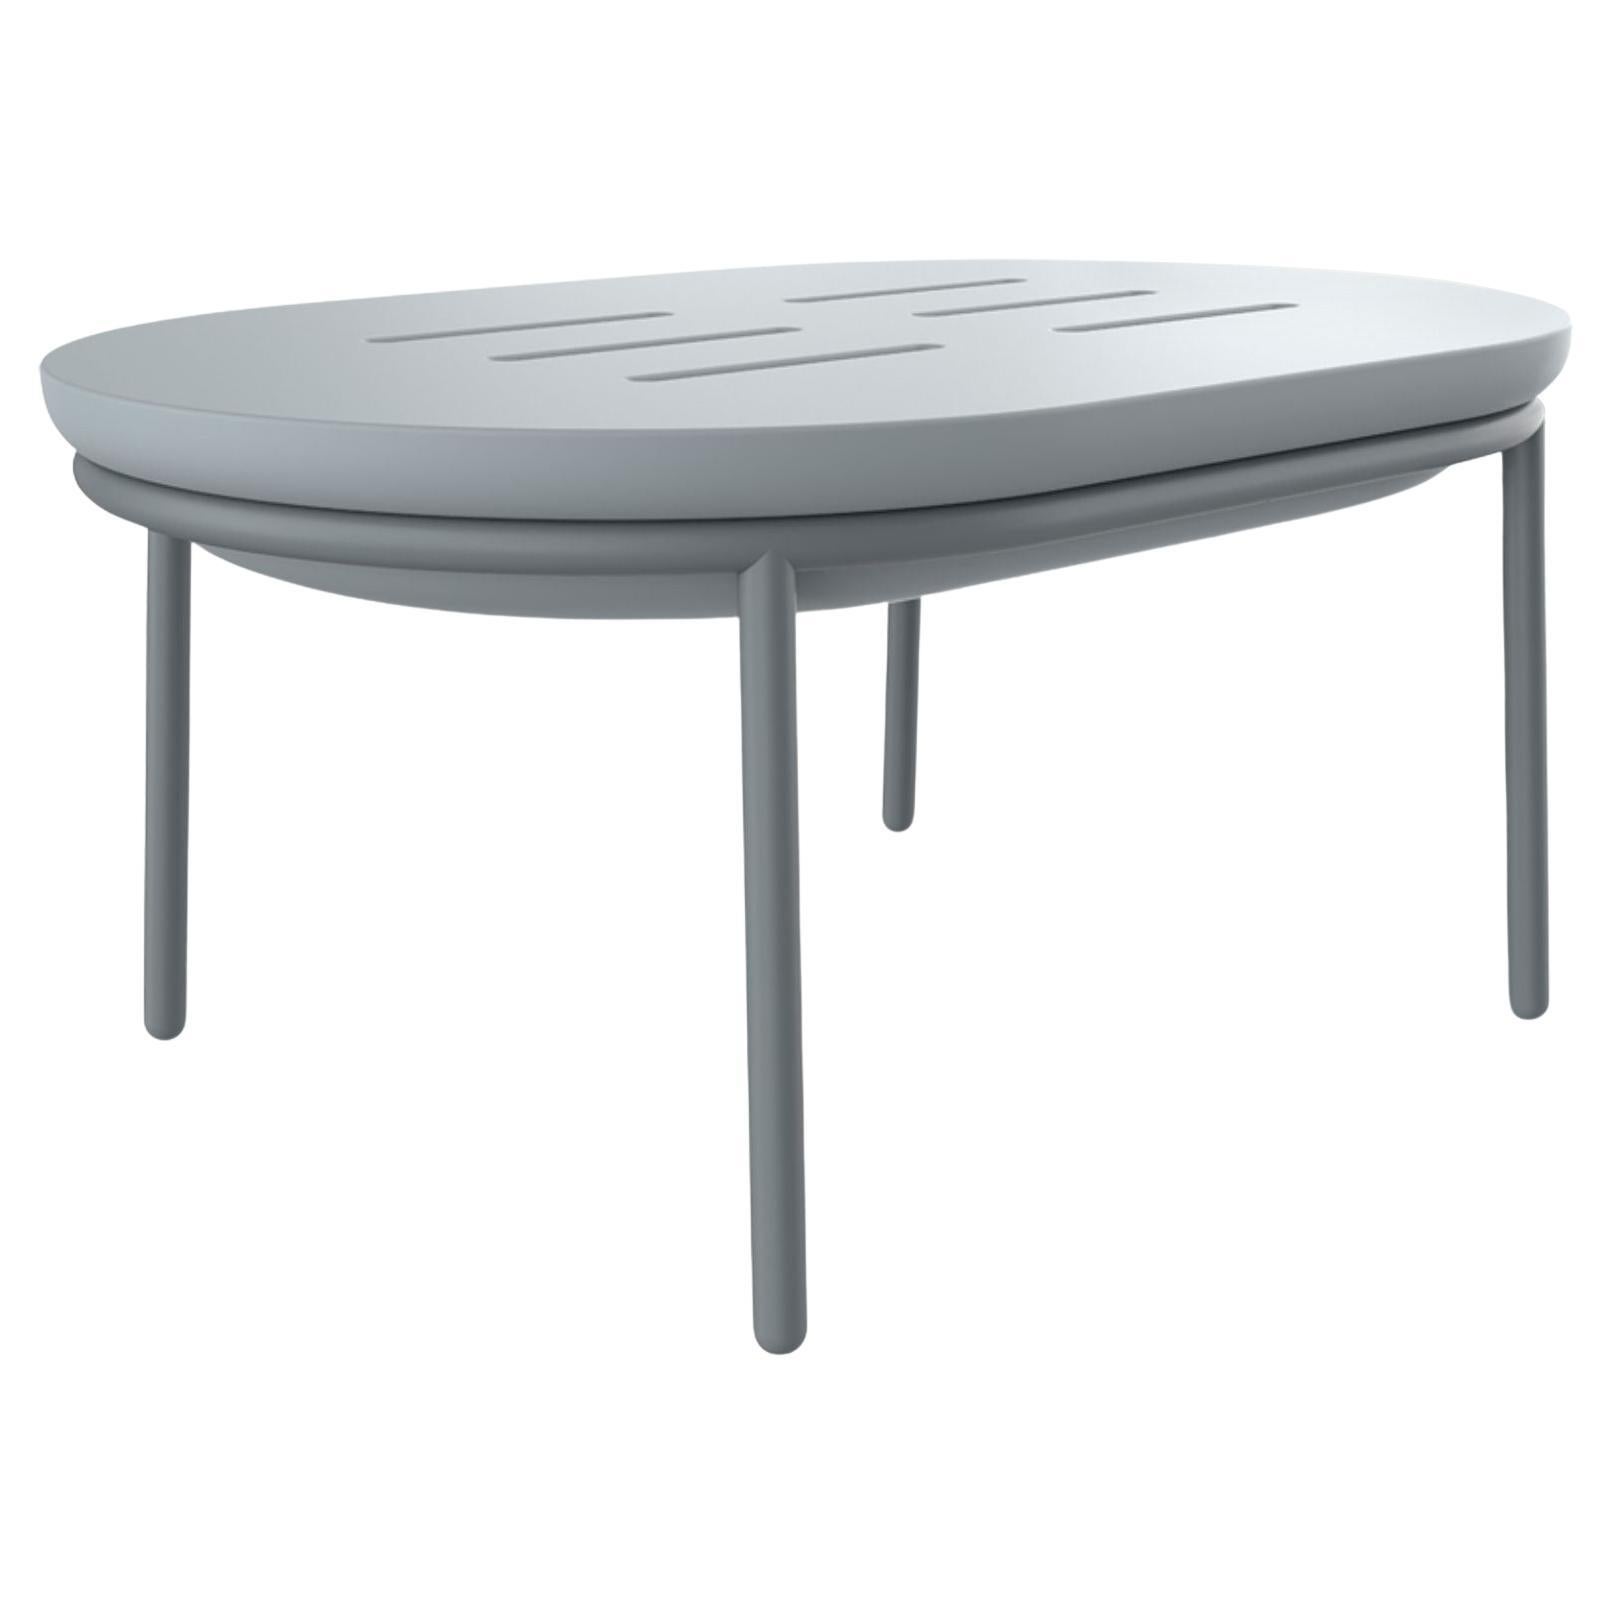 Lace Grey 90 Low Table by Mowee